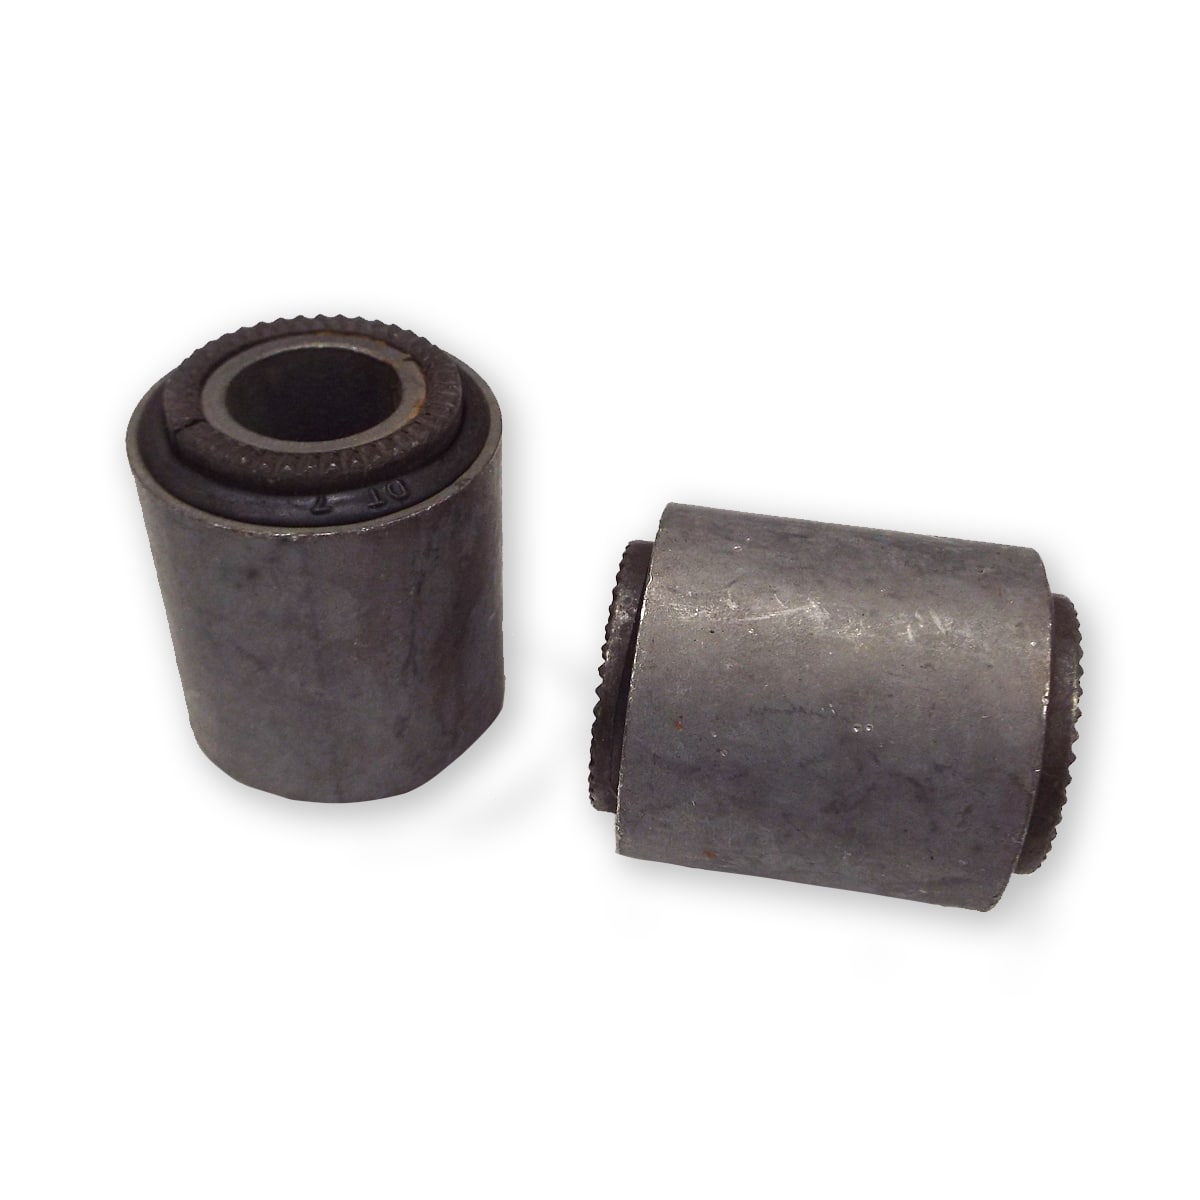 1960-1972 Rear Stabilizer suspension Bushings Chevrolet and GMC Pickup Truck